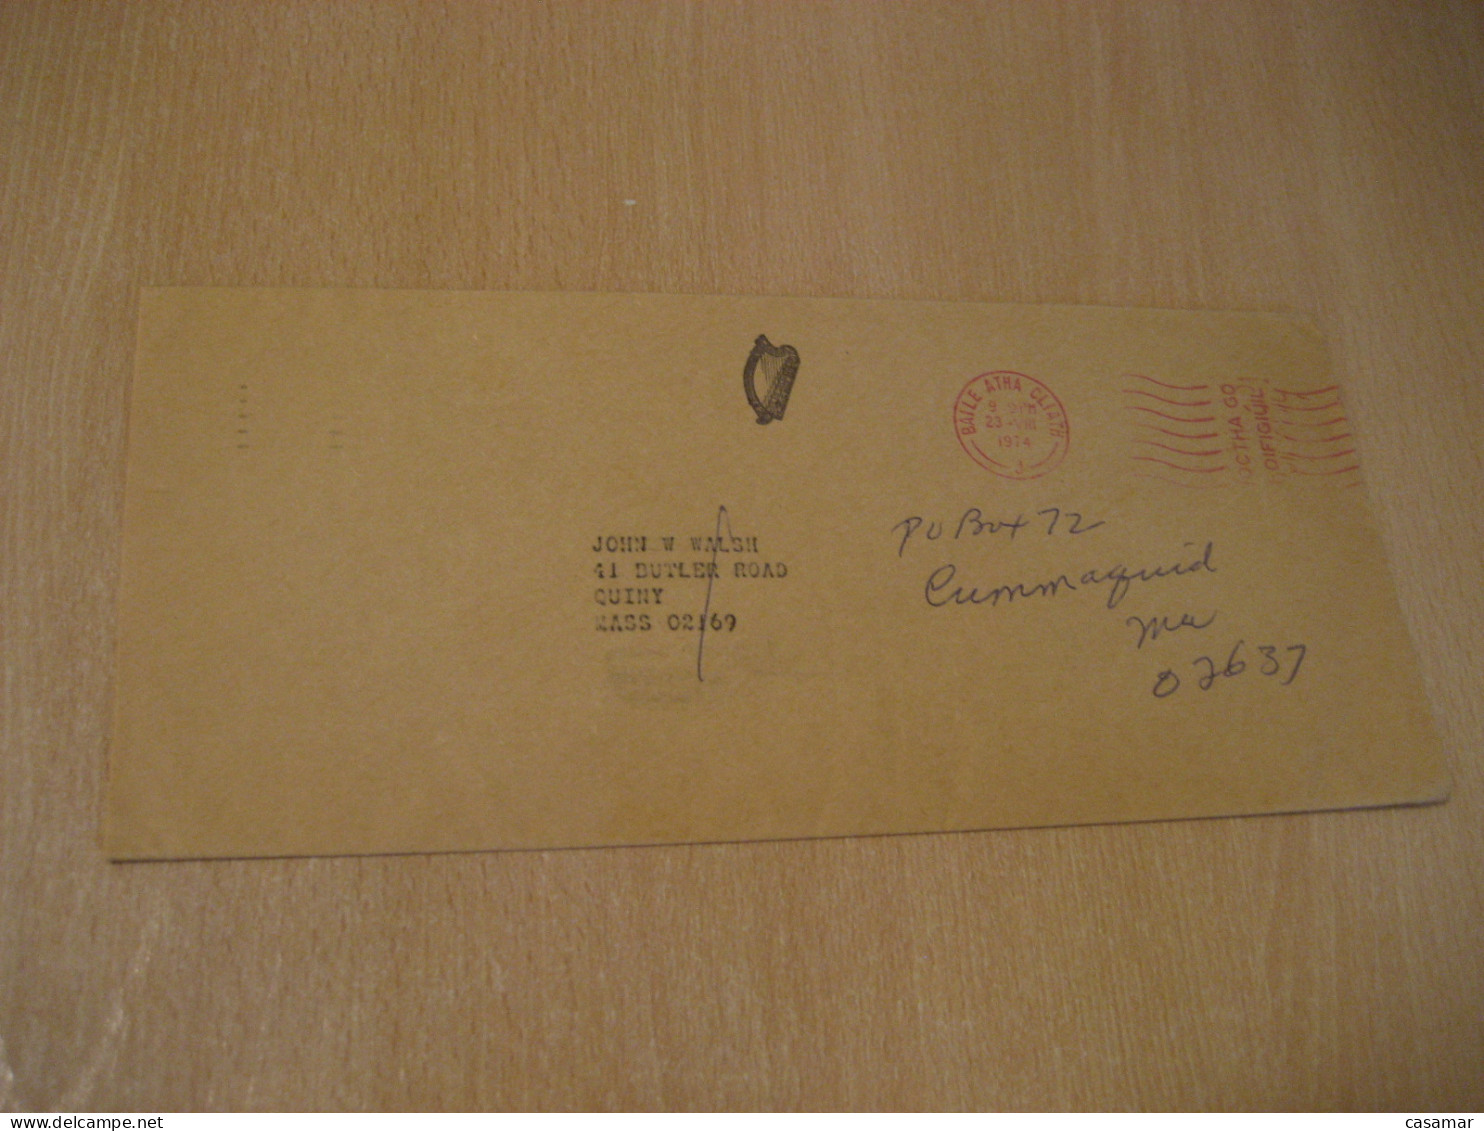 DUBLIN 1974 To Quiny Cummmaquid USA Air Meter Mail Cancel Cover IRELAND Eire - Lettres & Documents